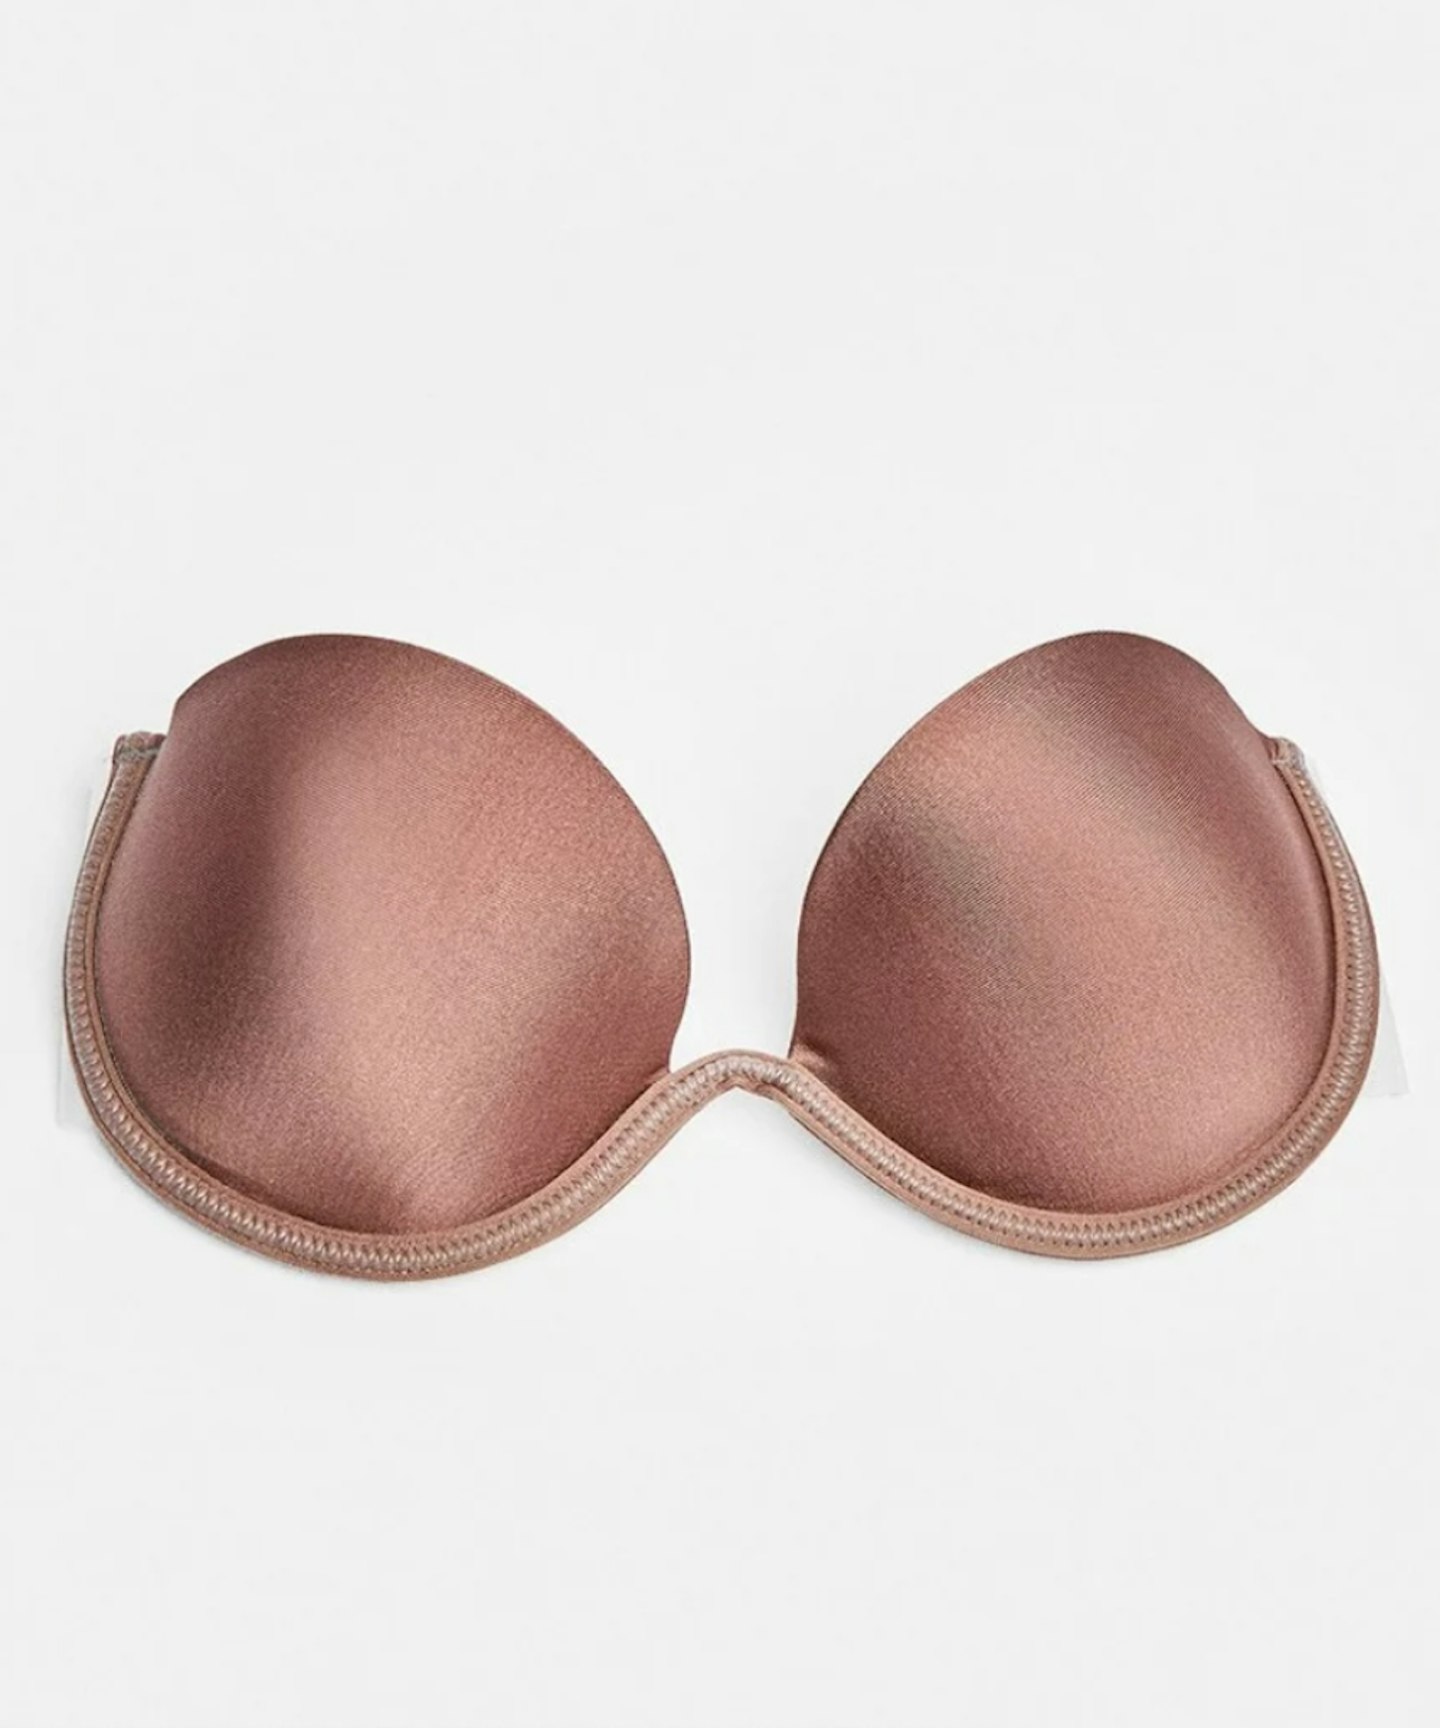 The Best Stick-On Bras To Buy Online UK 2024